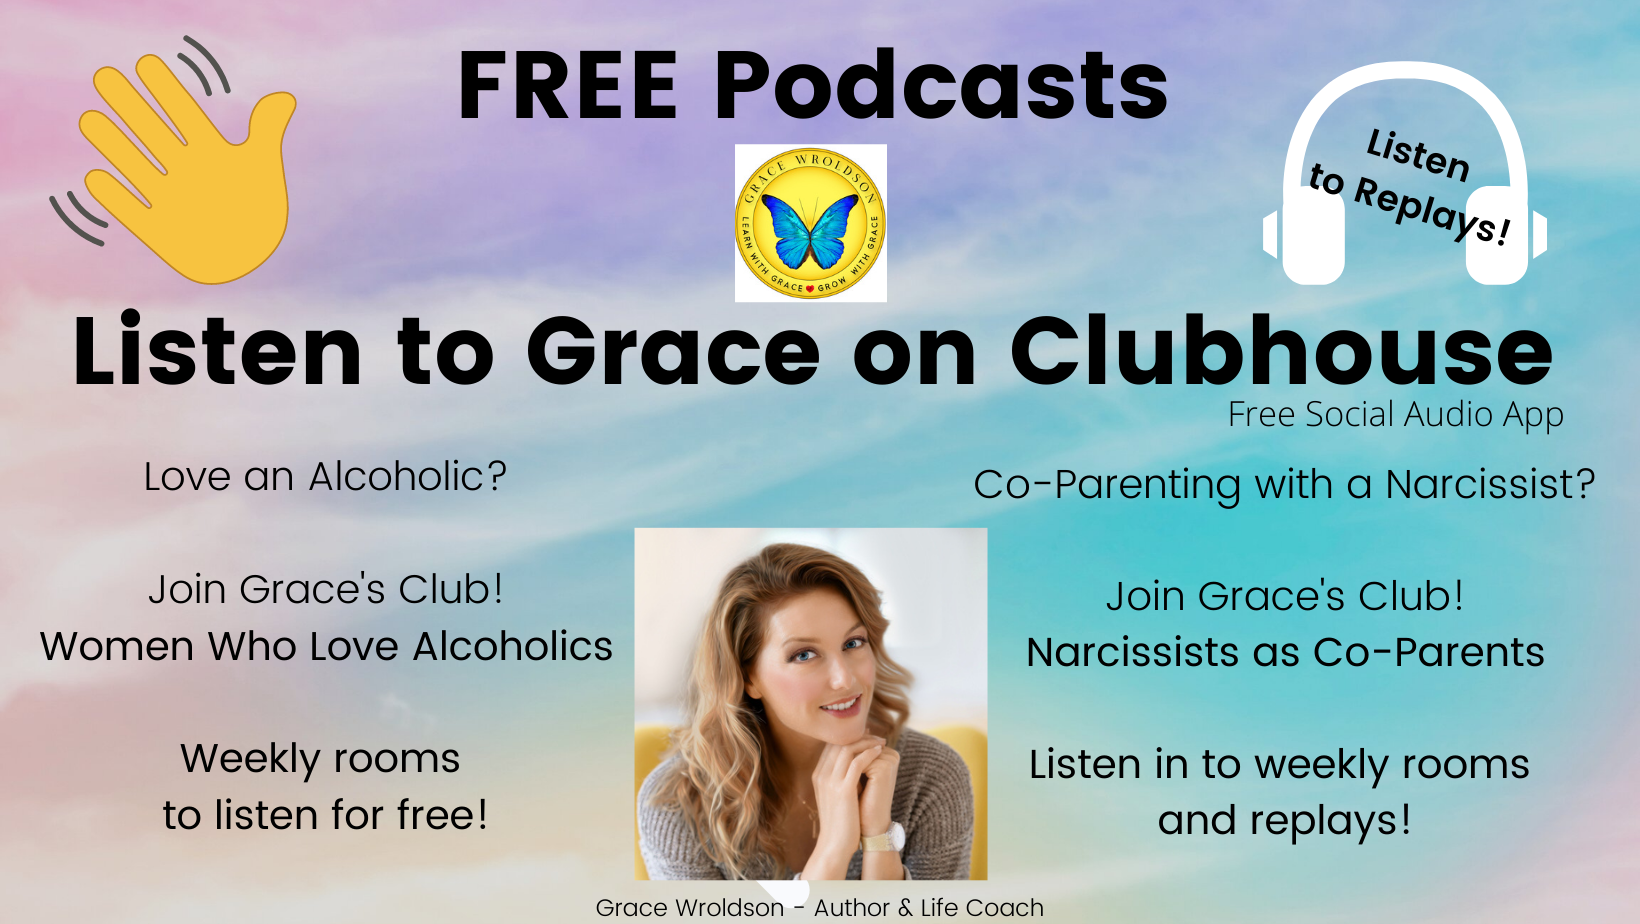 FREE Podcasts Listen to Grace on Clubhouse